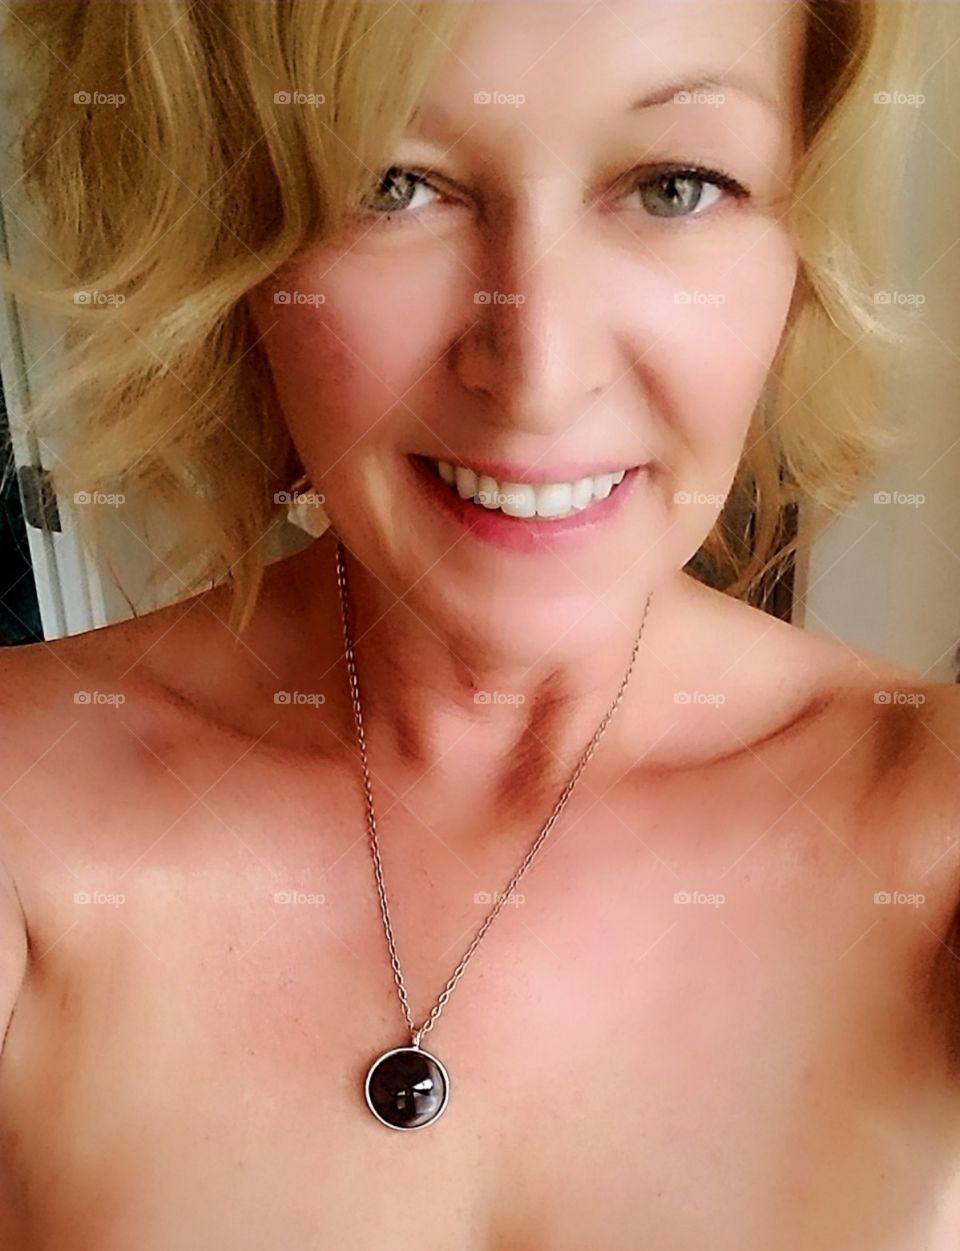 blonde hair & green eyes at 51 I feel great! sexy, vibrant & full of love ♥️